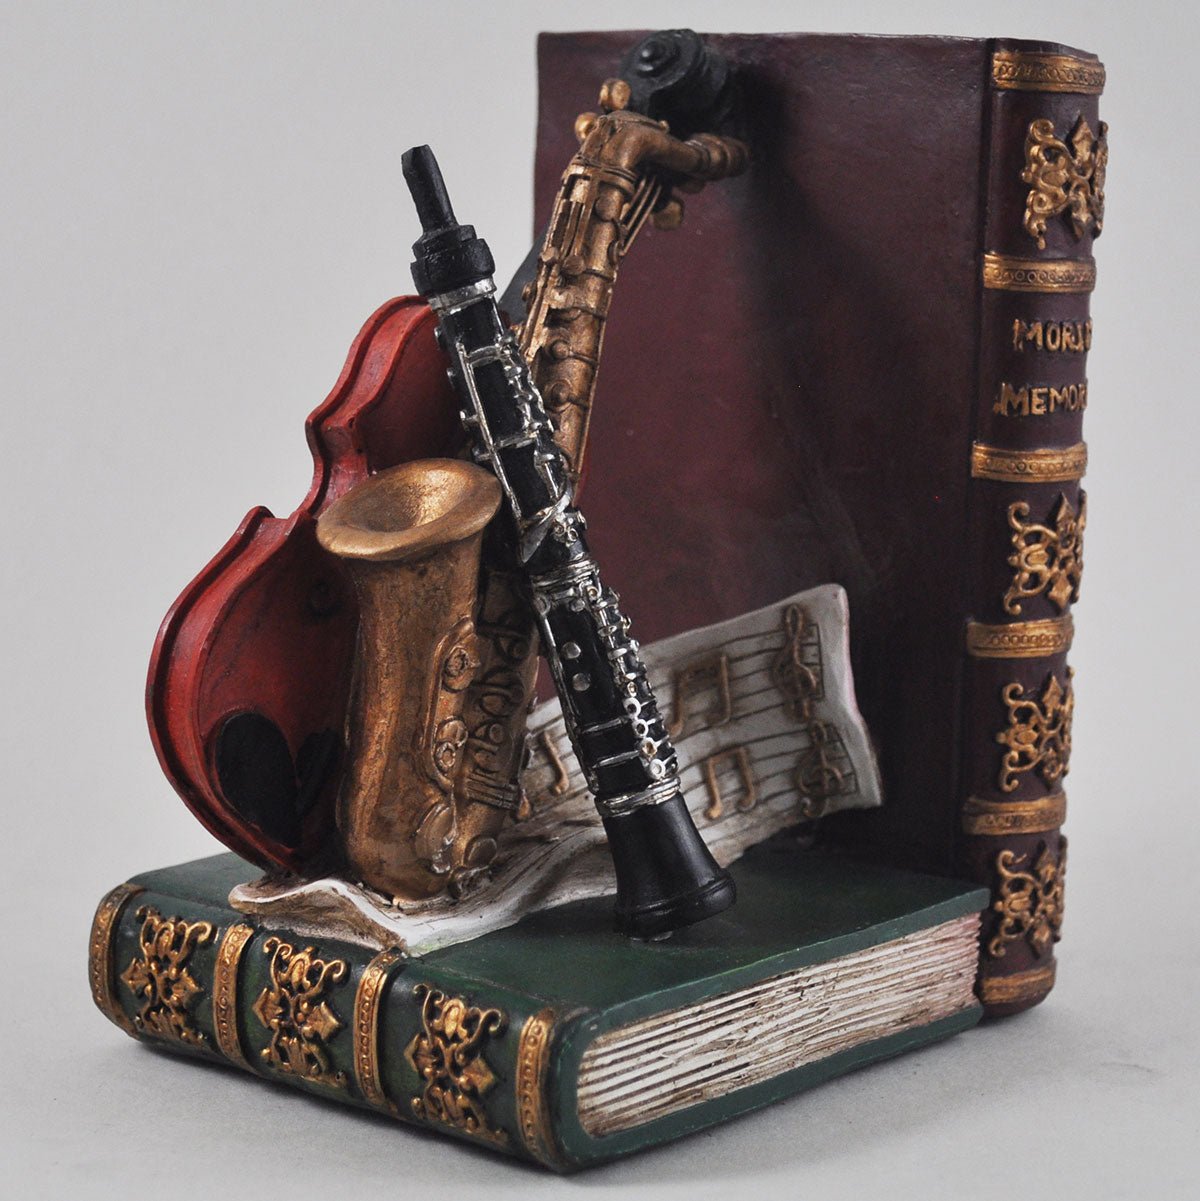 Classical Musical Instruments Shelf Tidy Bookends